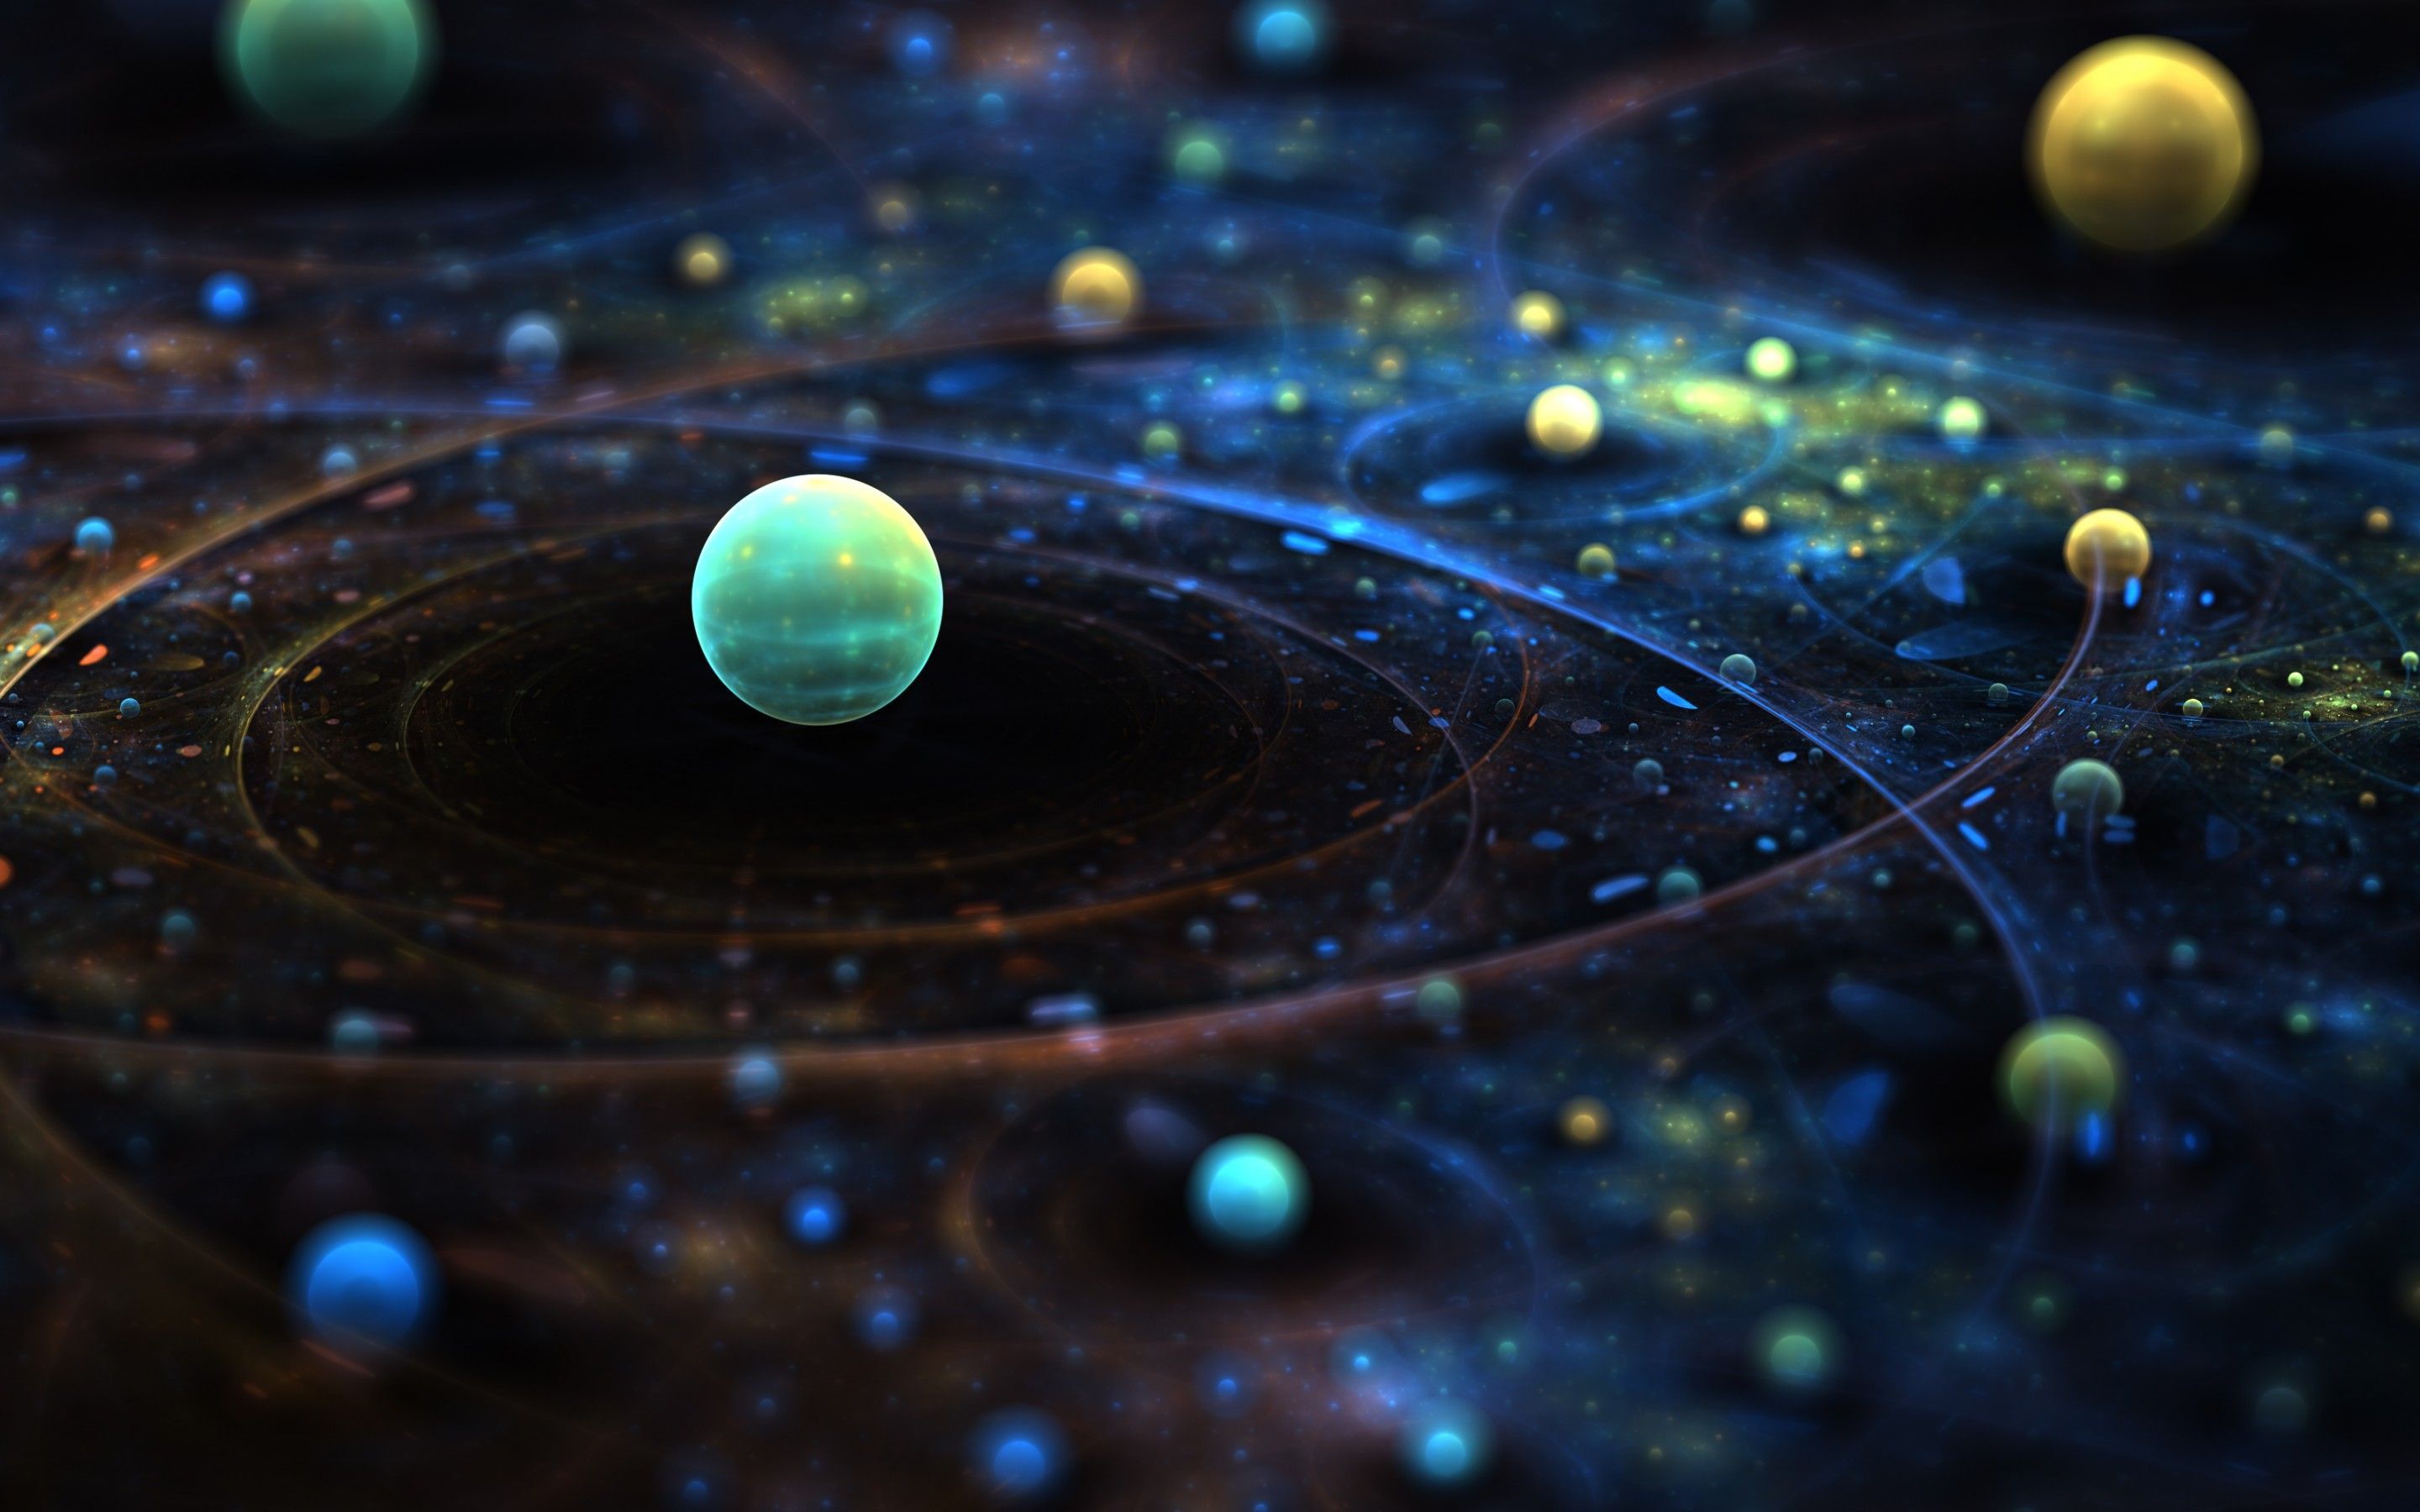 Solar System Live Wallpaper APK [UPDATED 2012-10-15] - Download Latest  Official Version